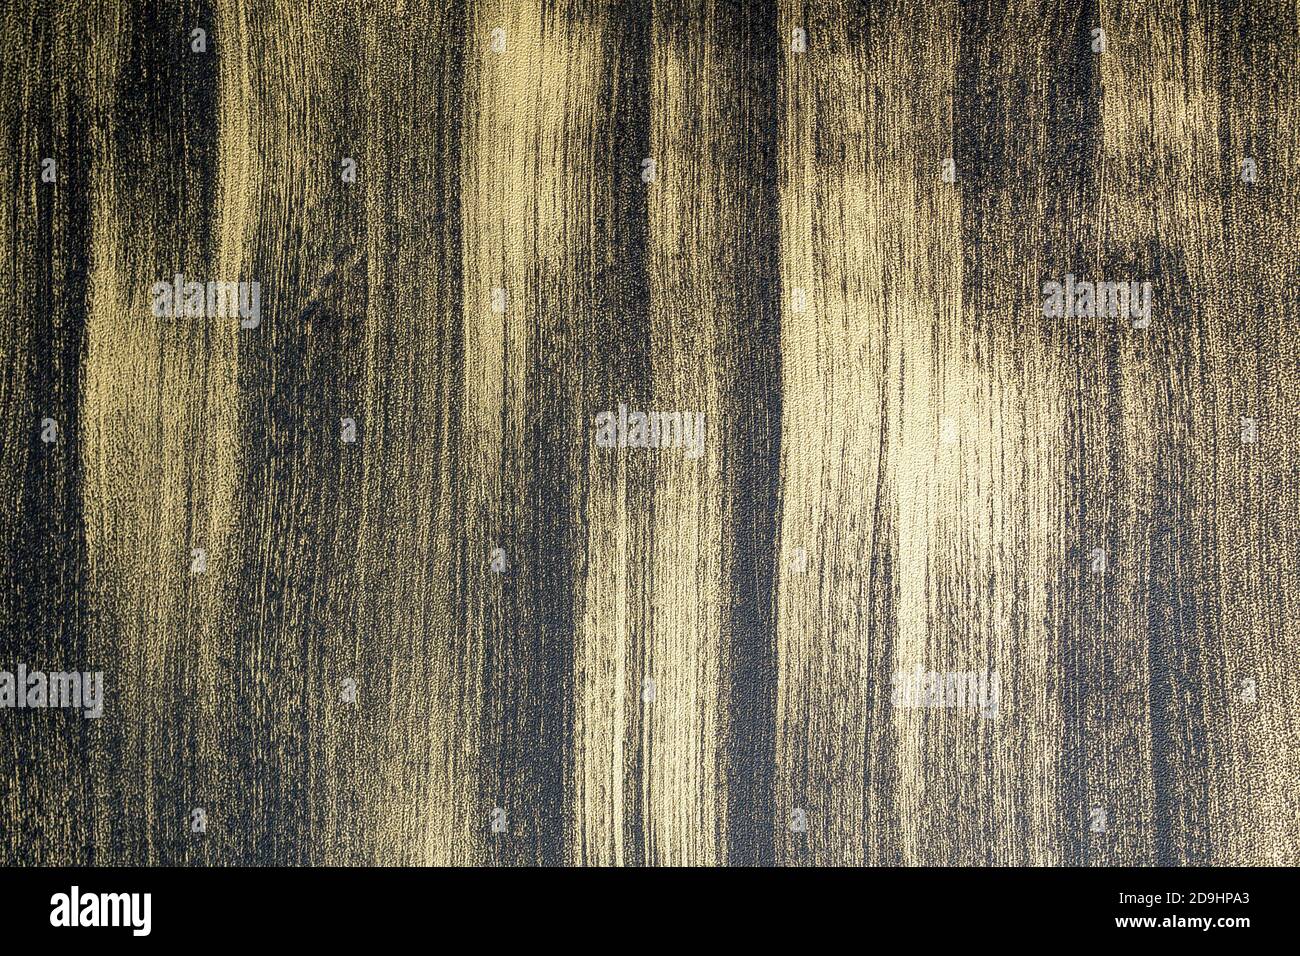 Metal surface with black brush strokes over light background, grunge abstract background. Stock Photo